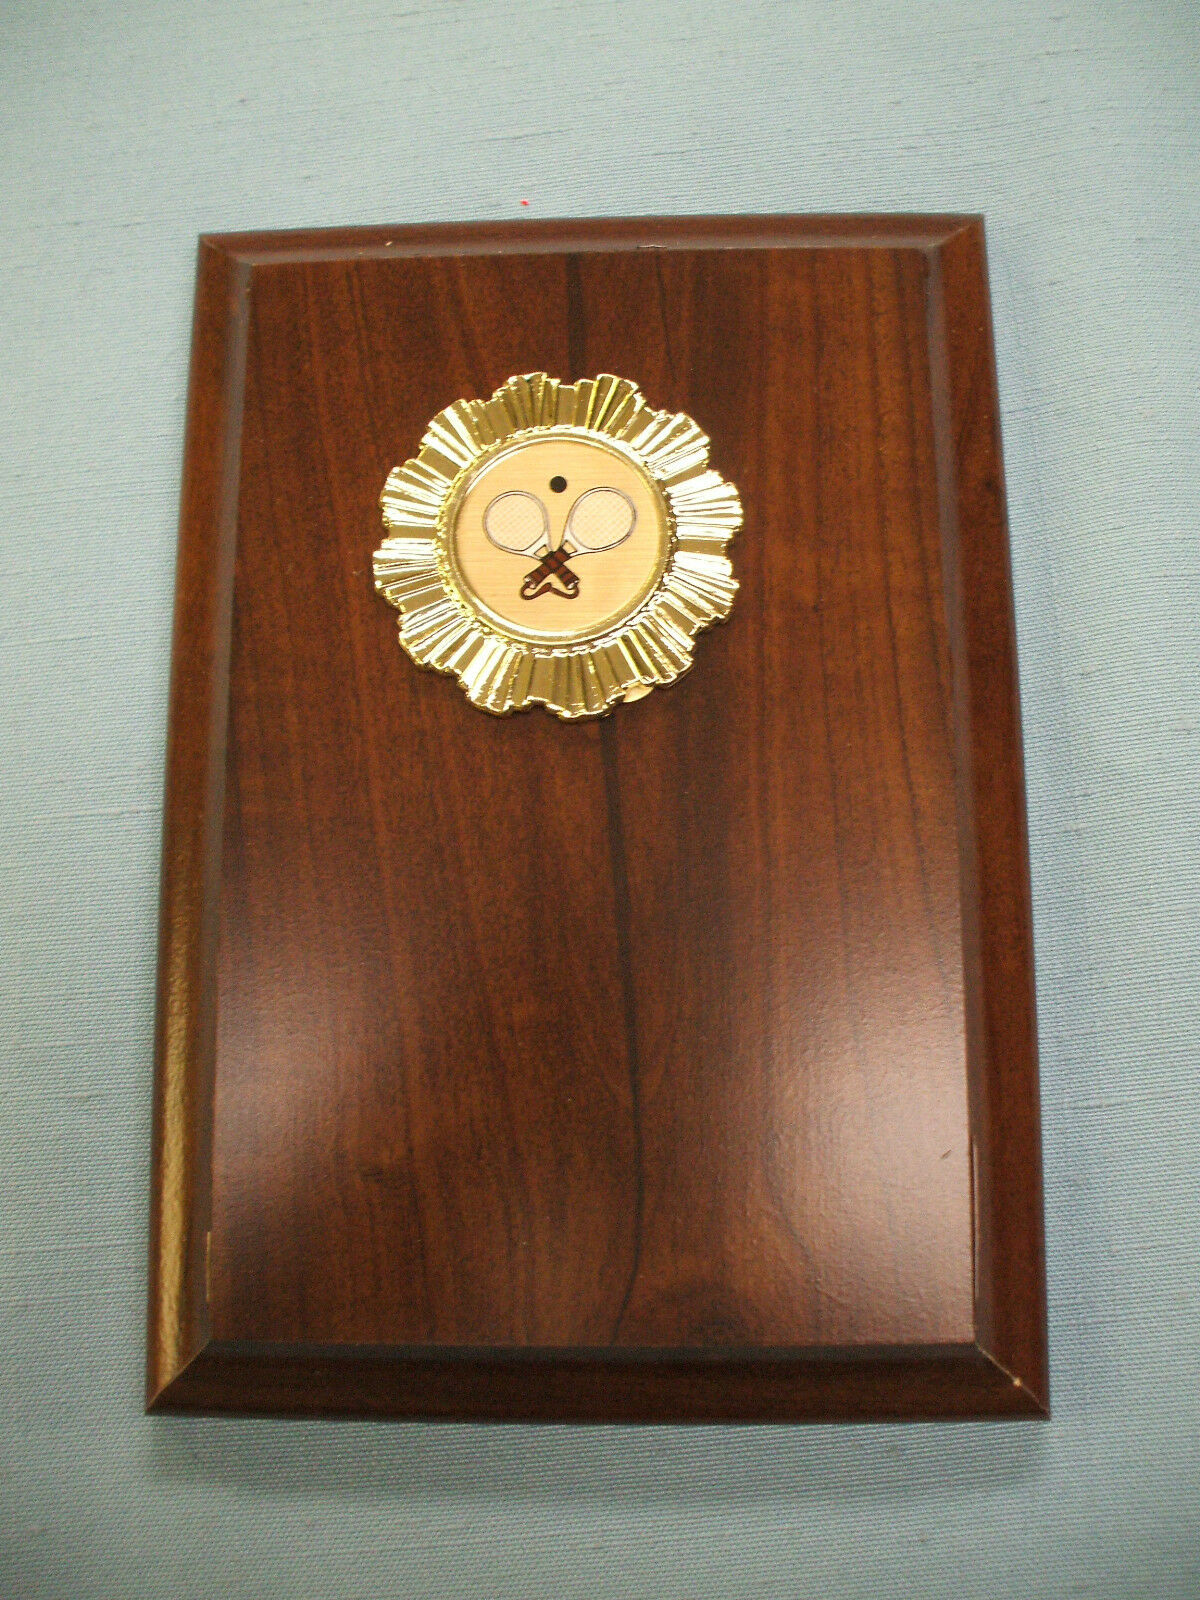 racquetball trophy plaque 4 1/2